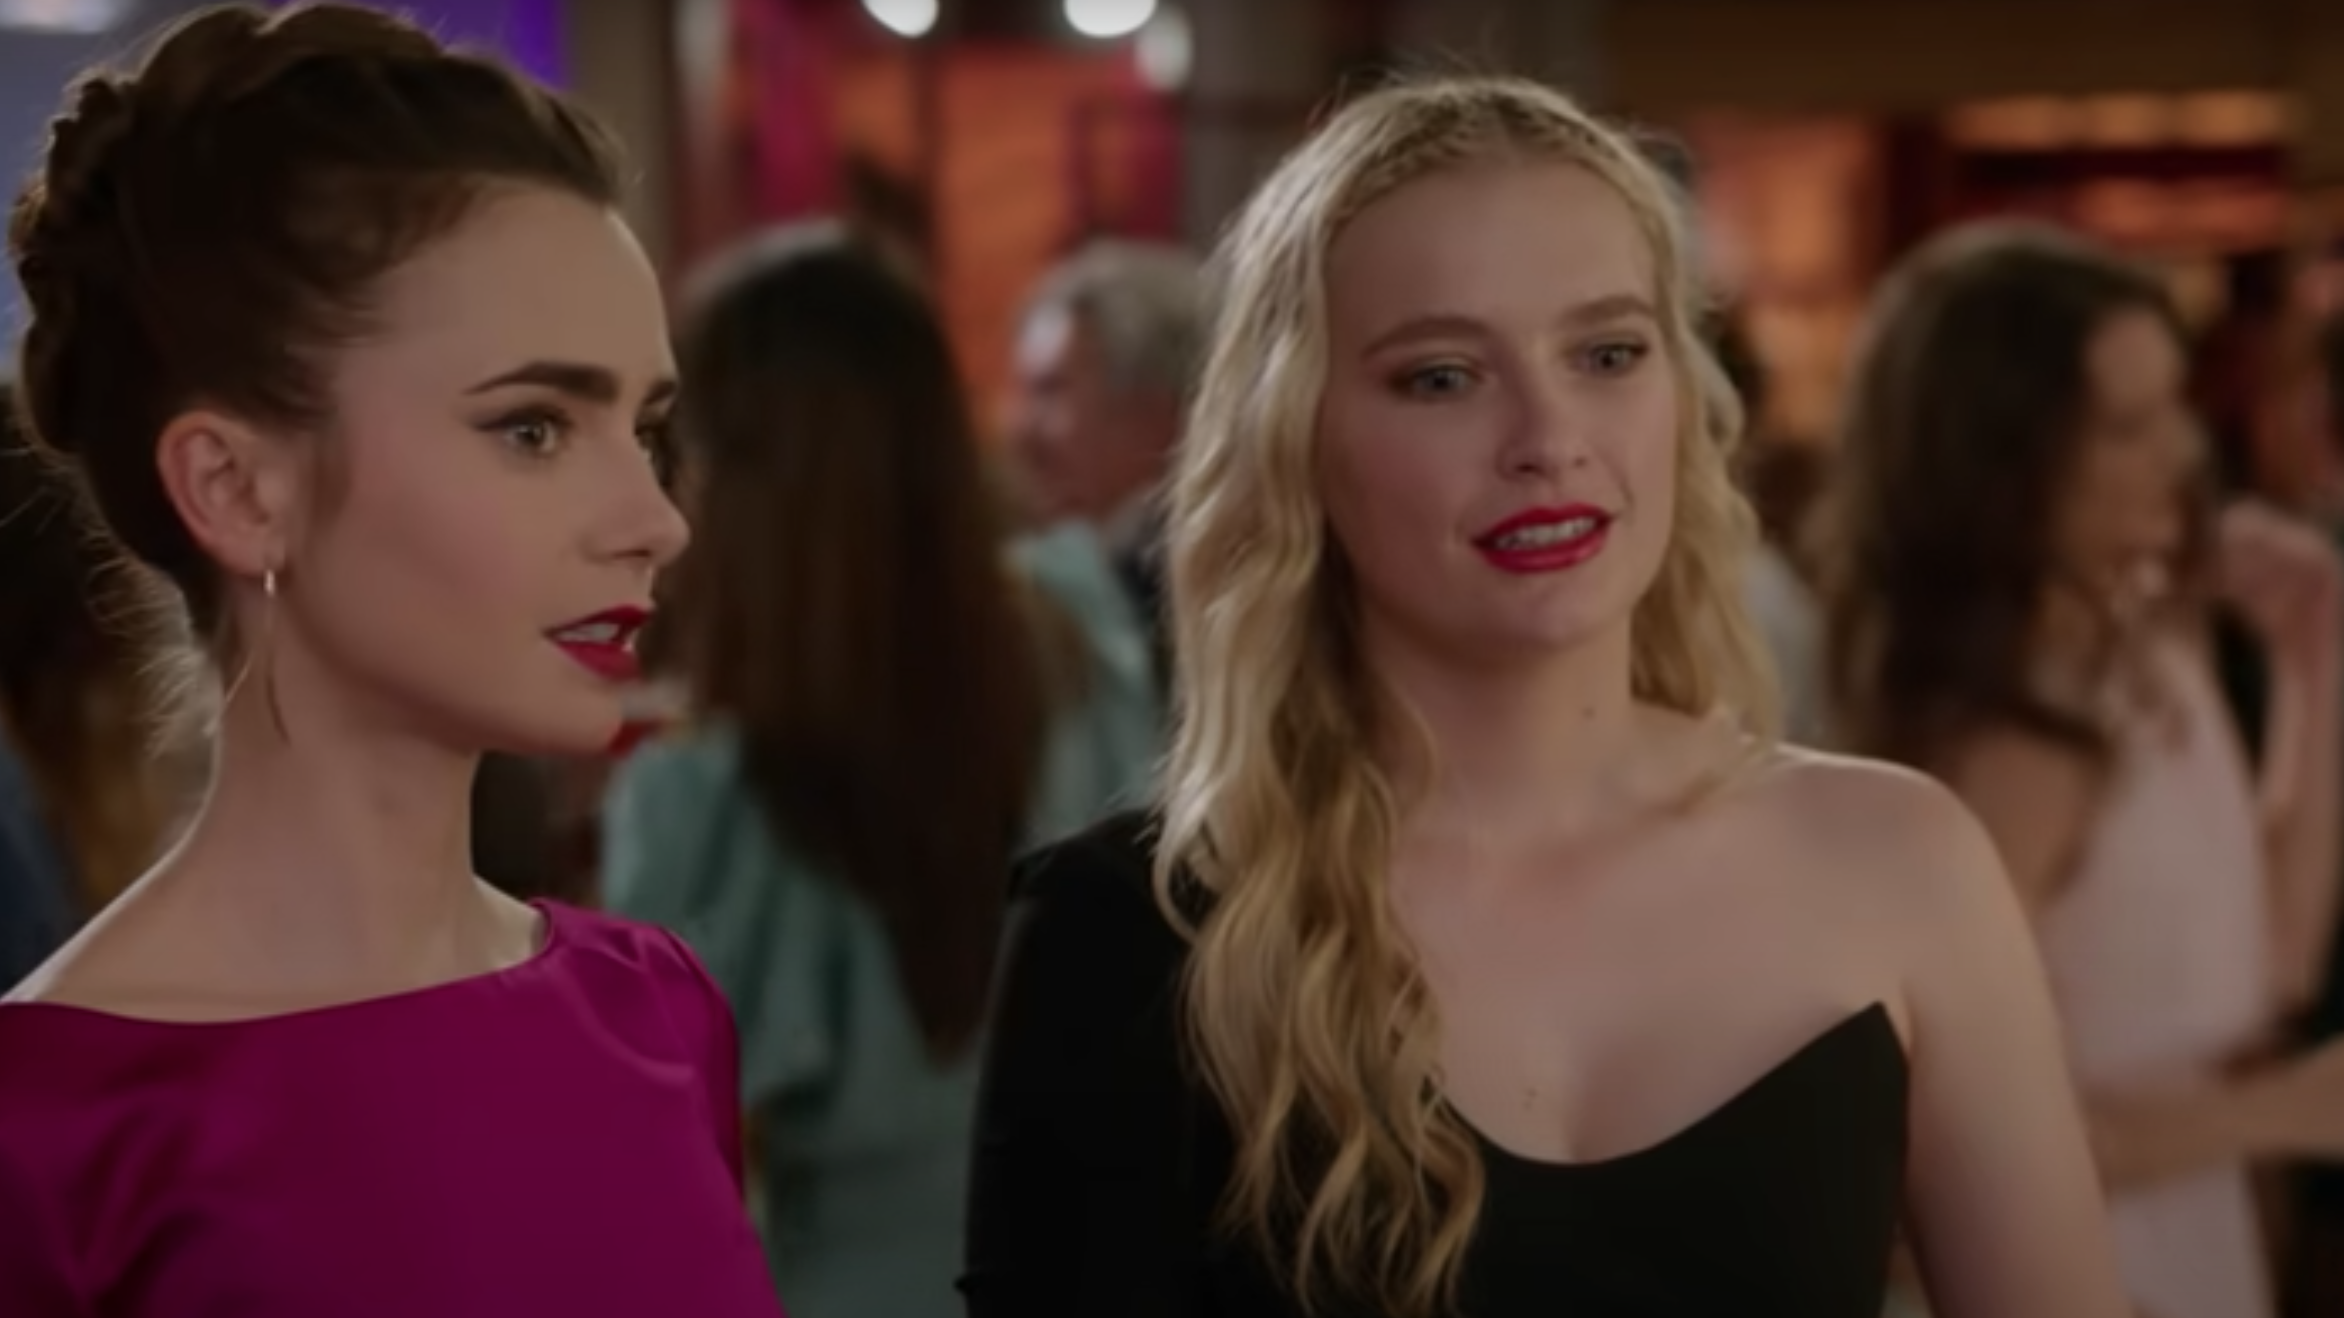 Emily in Paris season 2: Is Camille the most fashionable character?